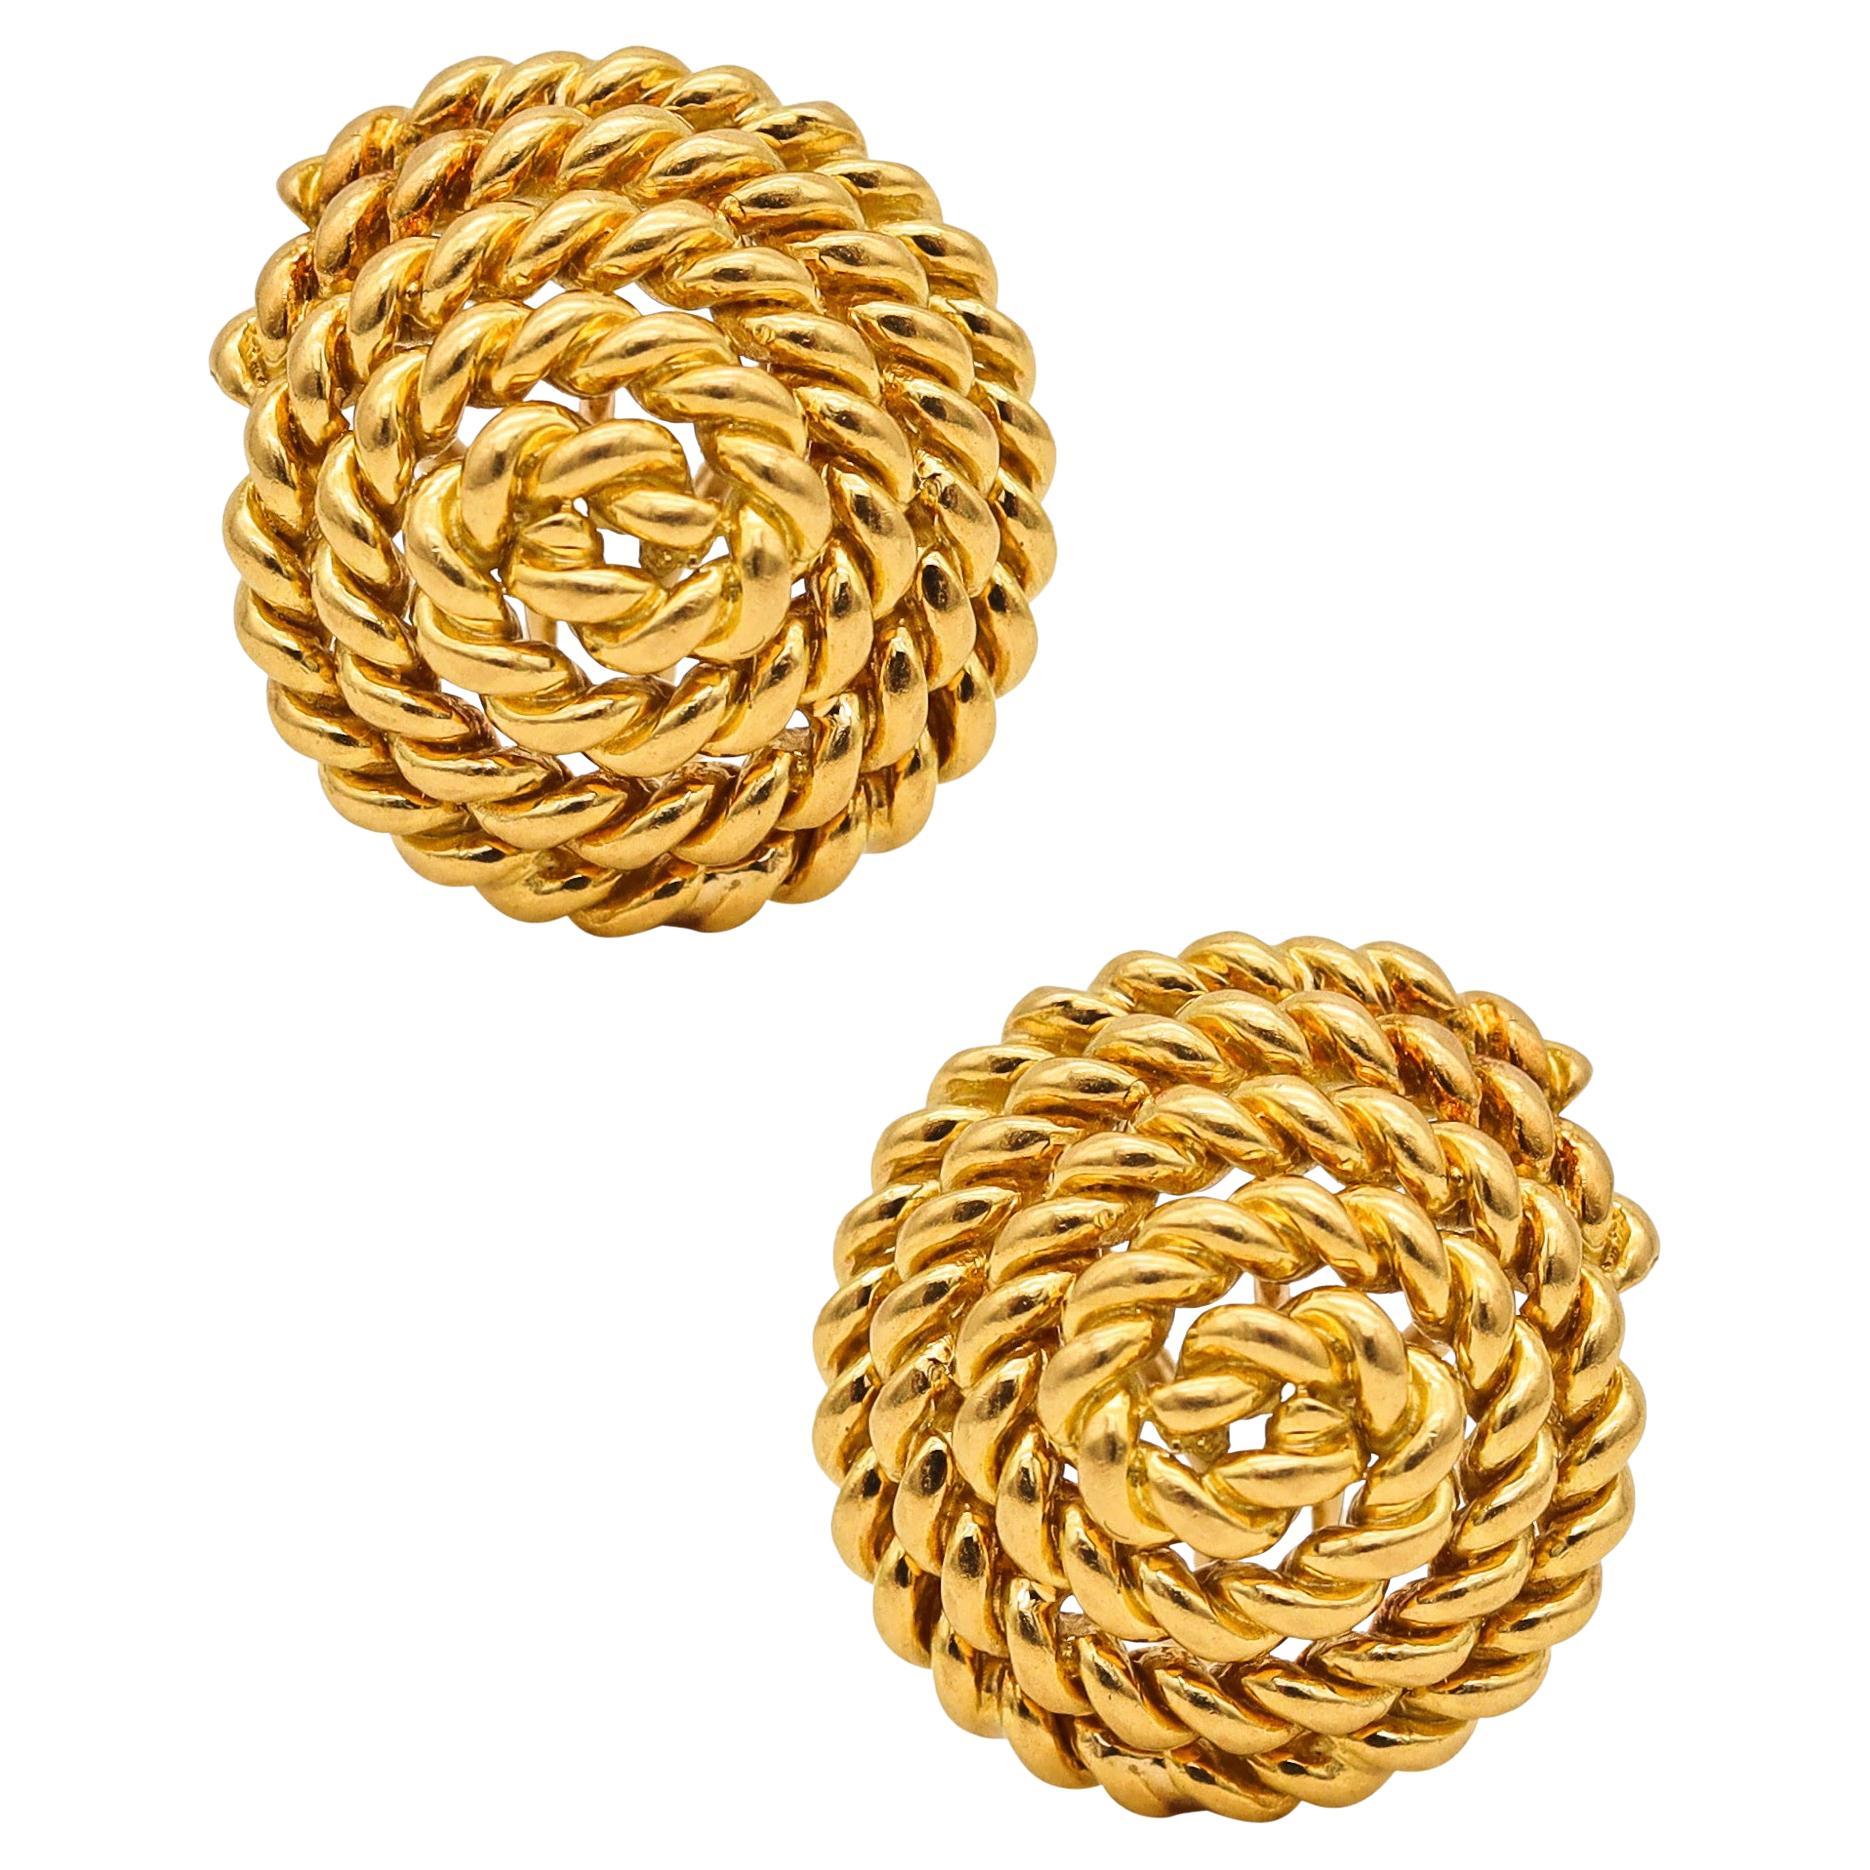 Tiffany & Co. 1985Schlumberger Design Twisted Ropes Earrings In 18Kt YellowGold